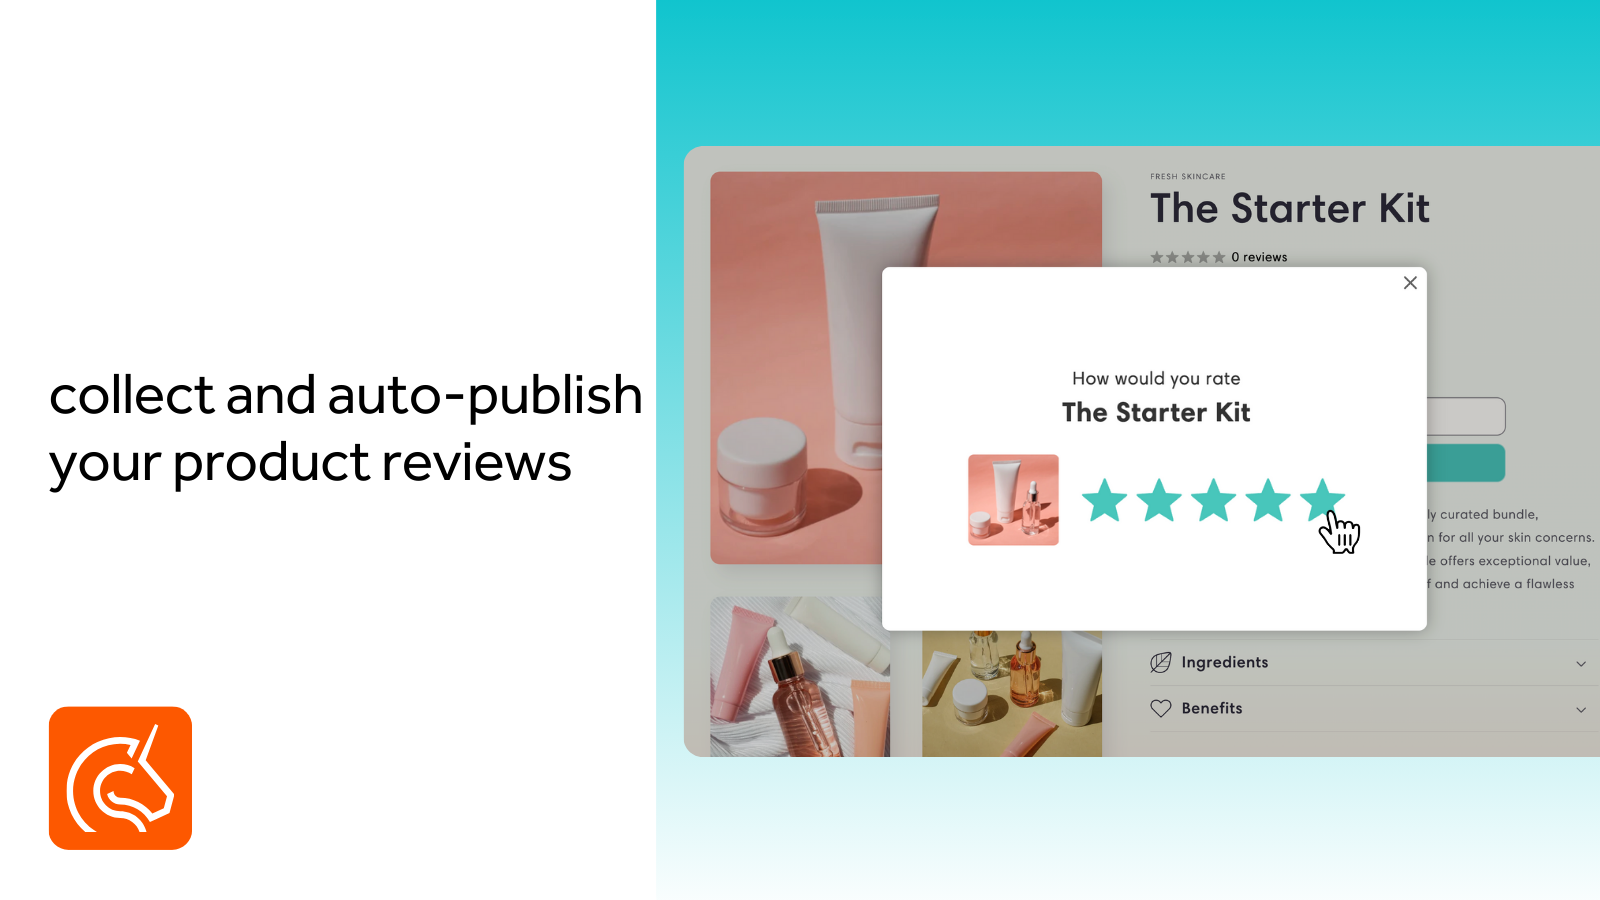 collect and auto-publish product reviews